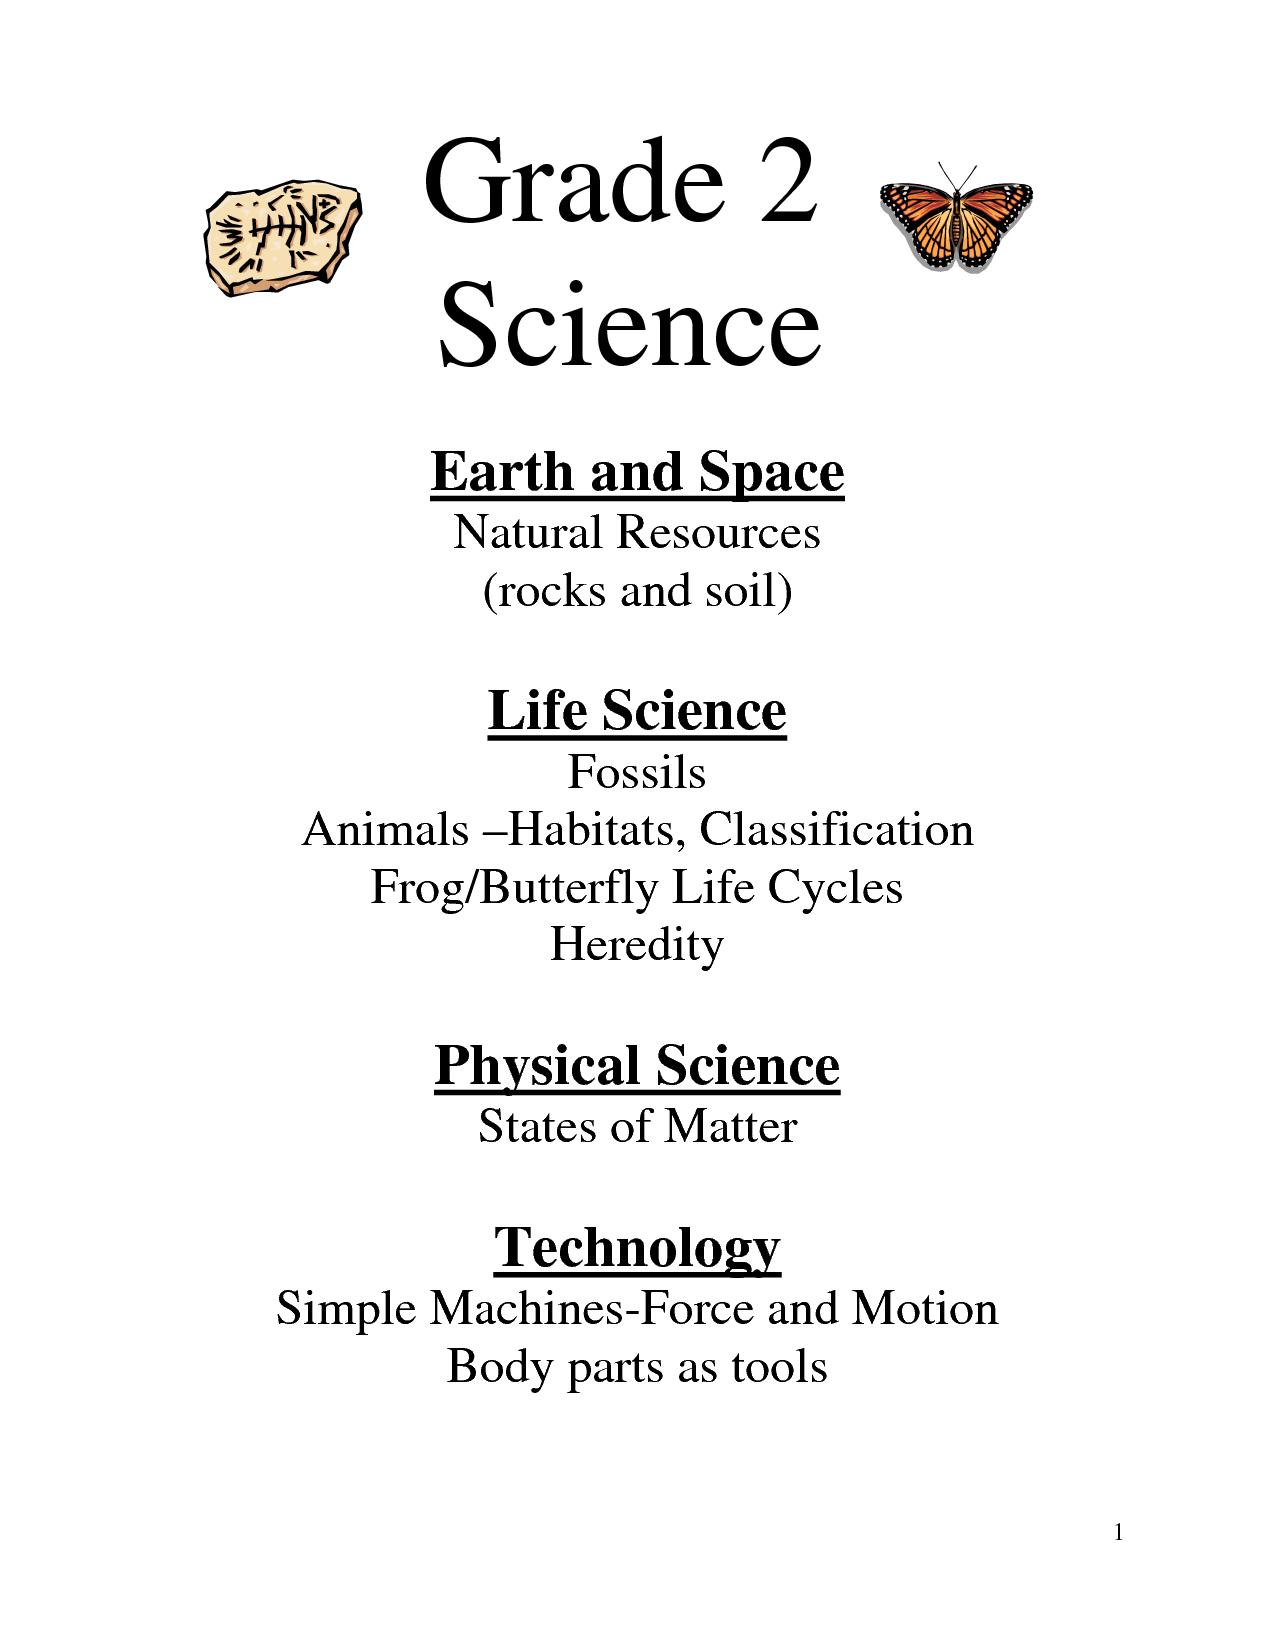 17-best-images-of-science-tools-worksheet-classifying-living-things